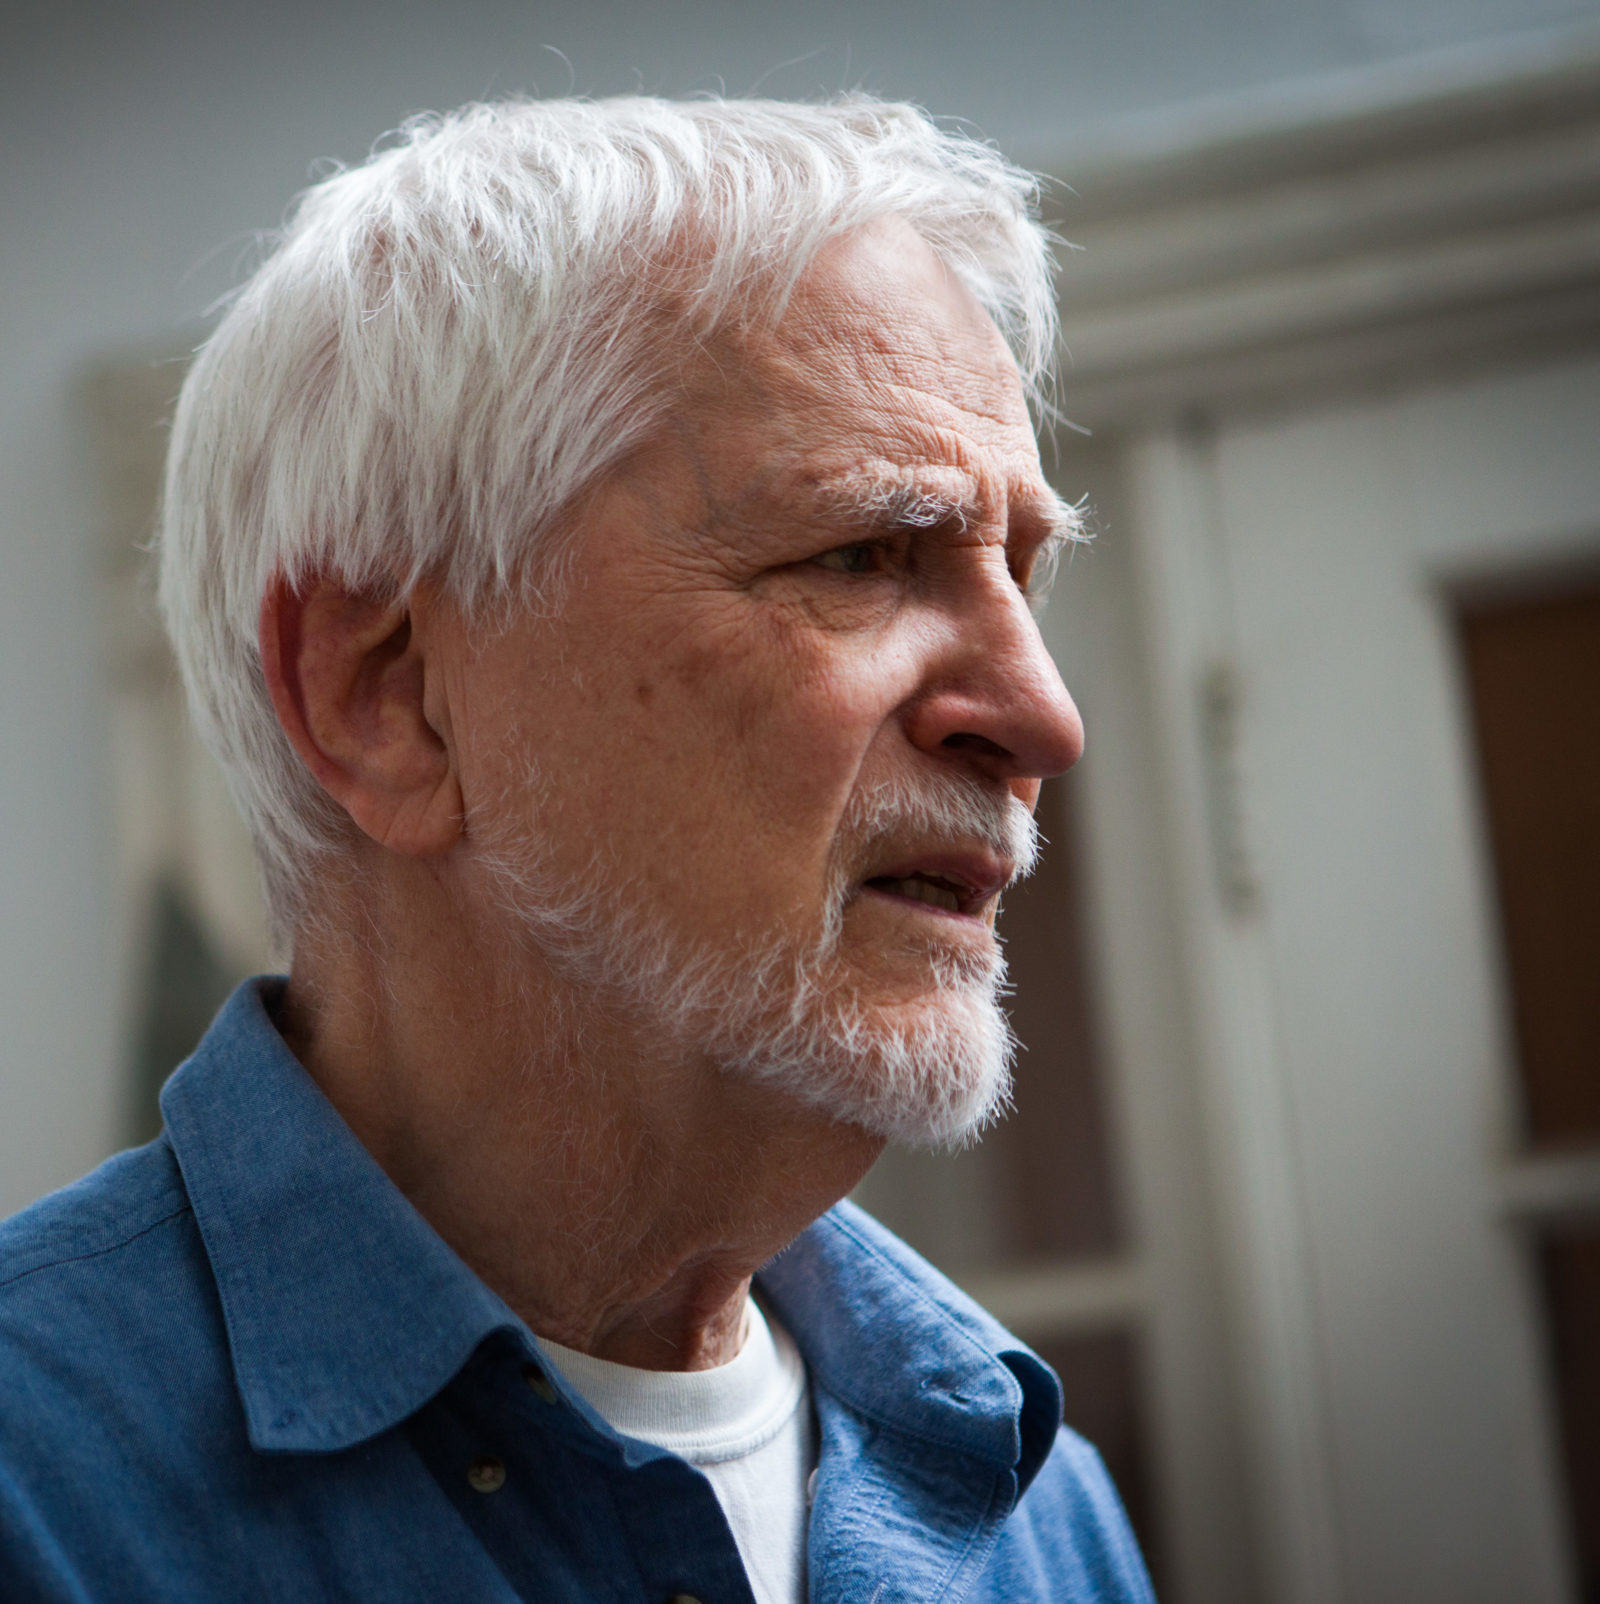 Lennart Anderson profile photo from the side, silver hair, clippered beard, looking concerned